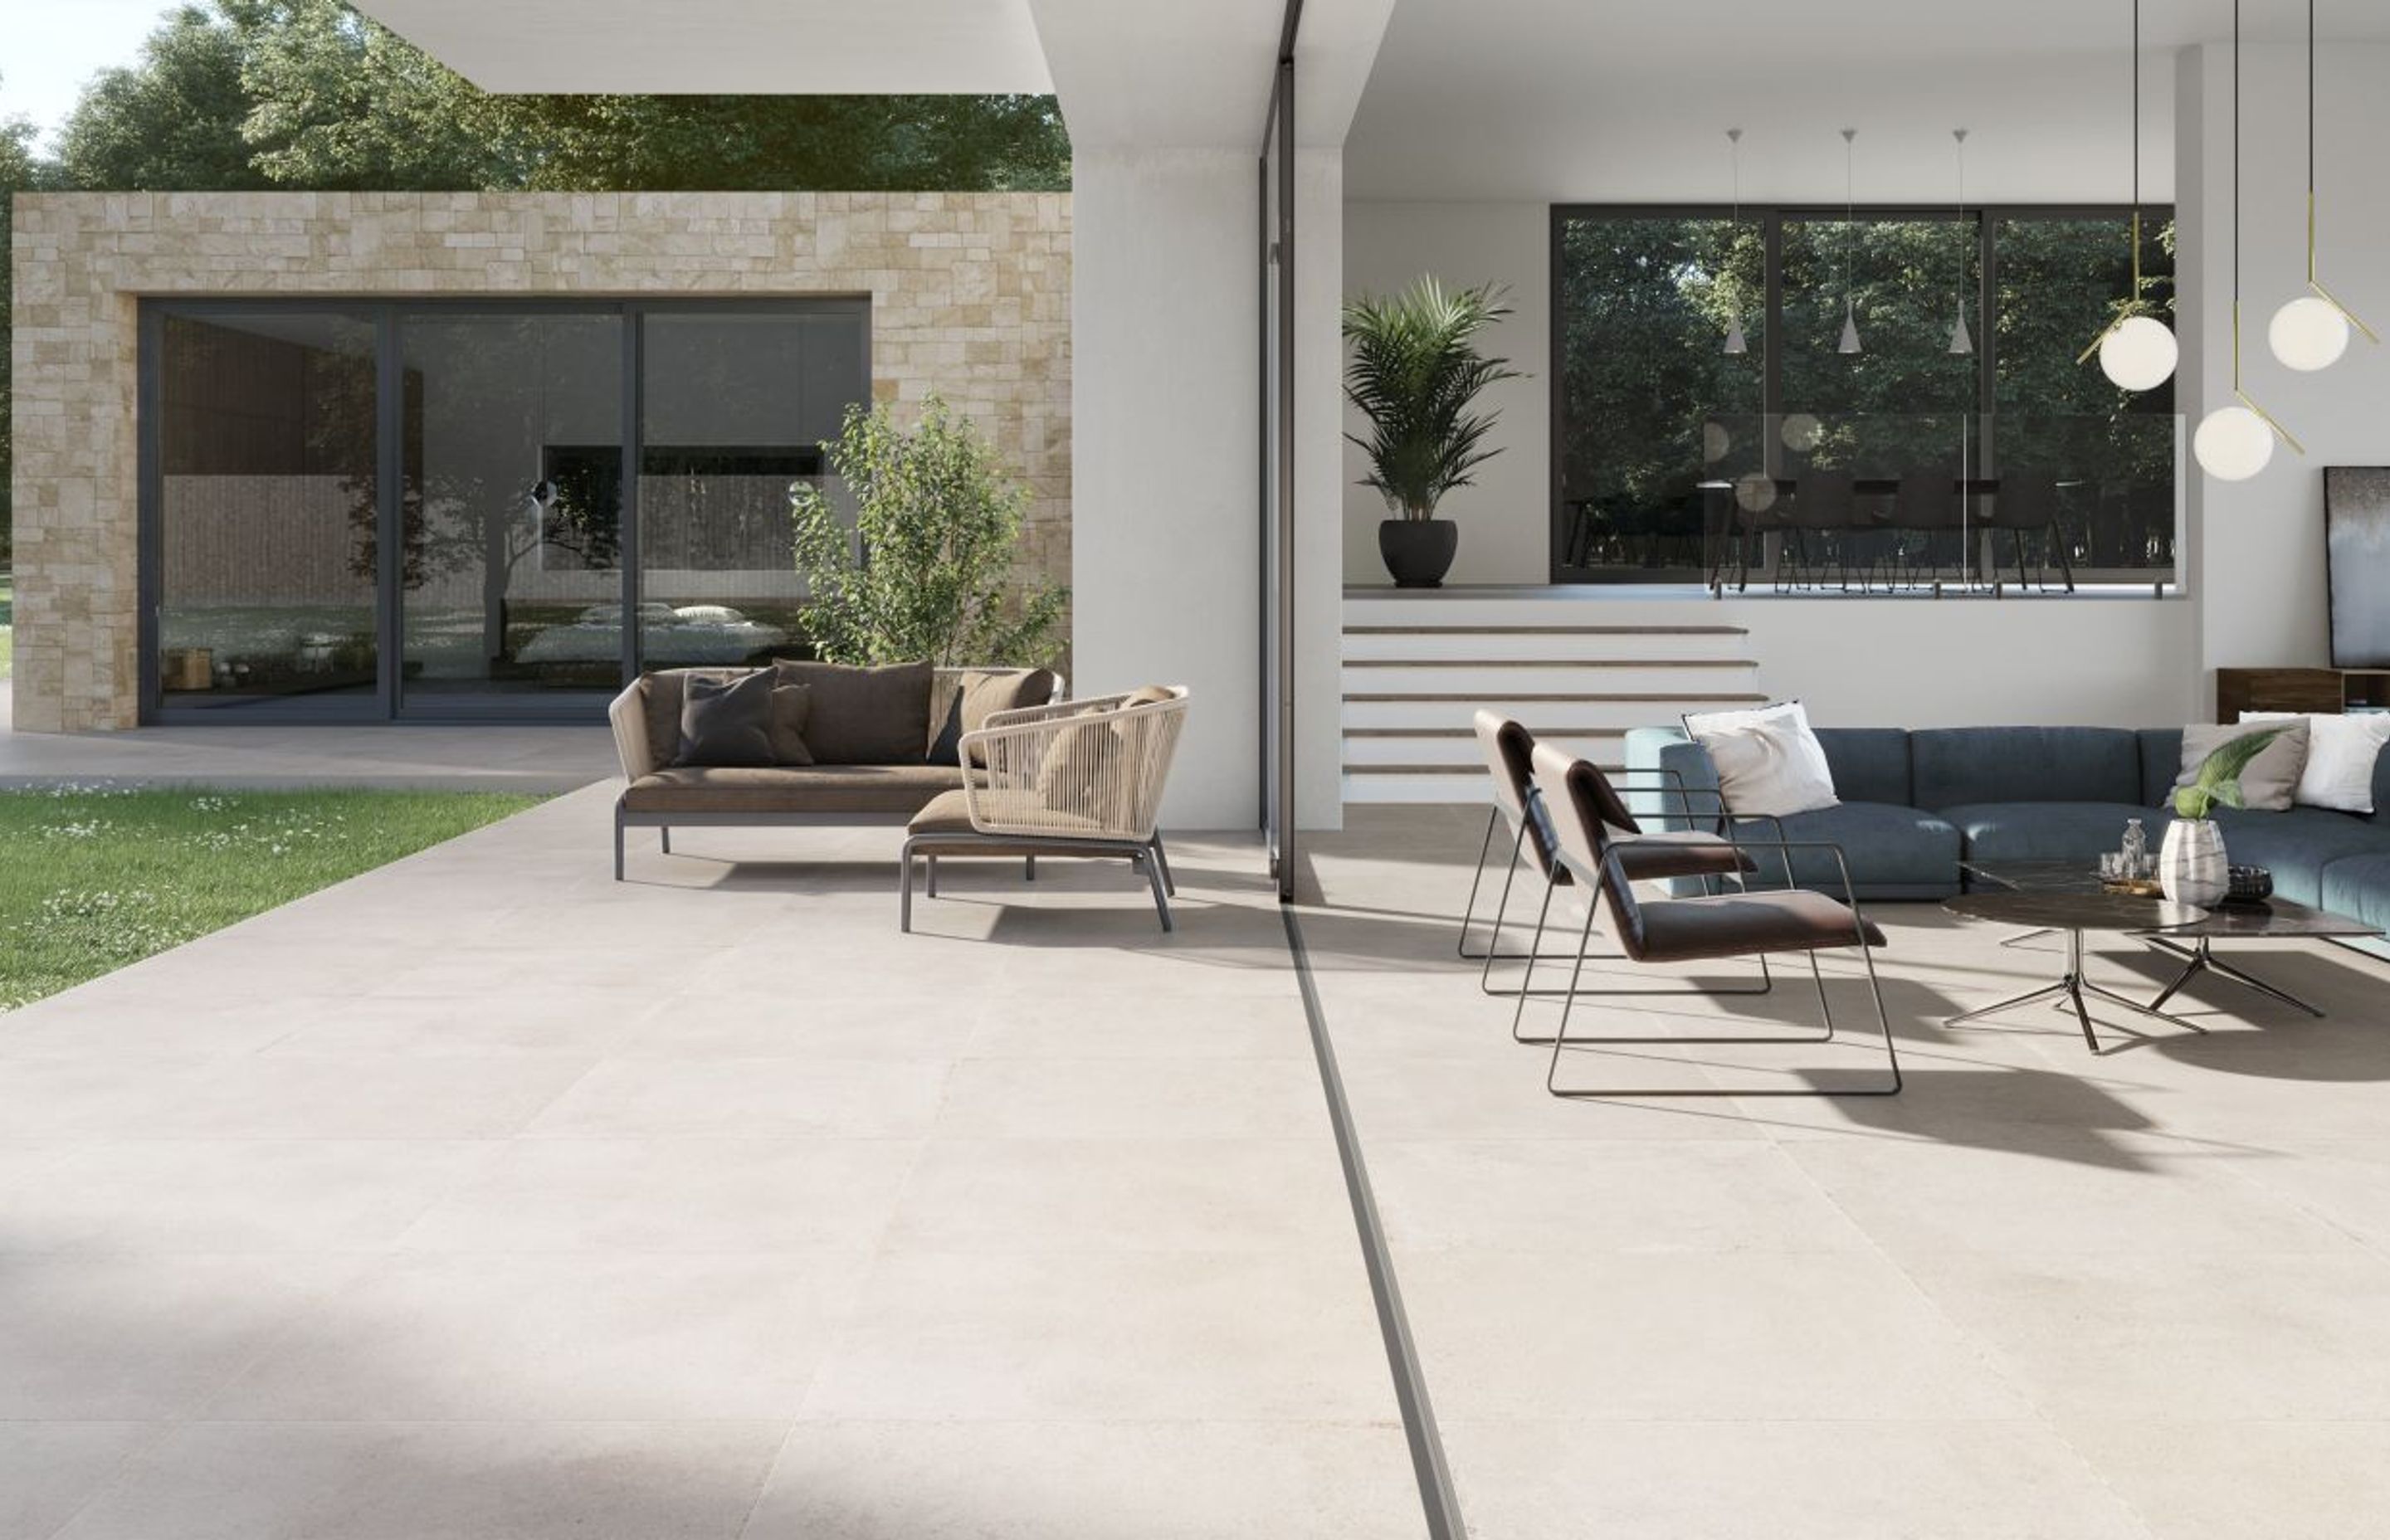 By using tiles throughout the home, seamless indoor-outdoor connection can be created.